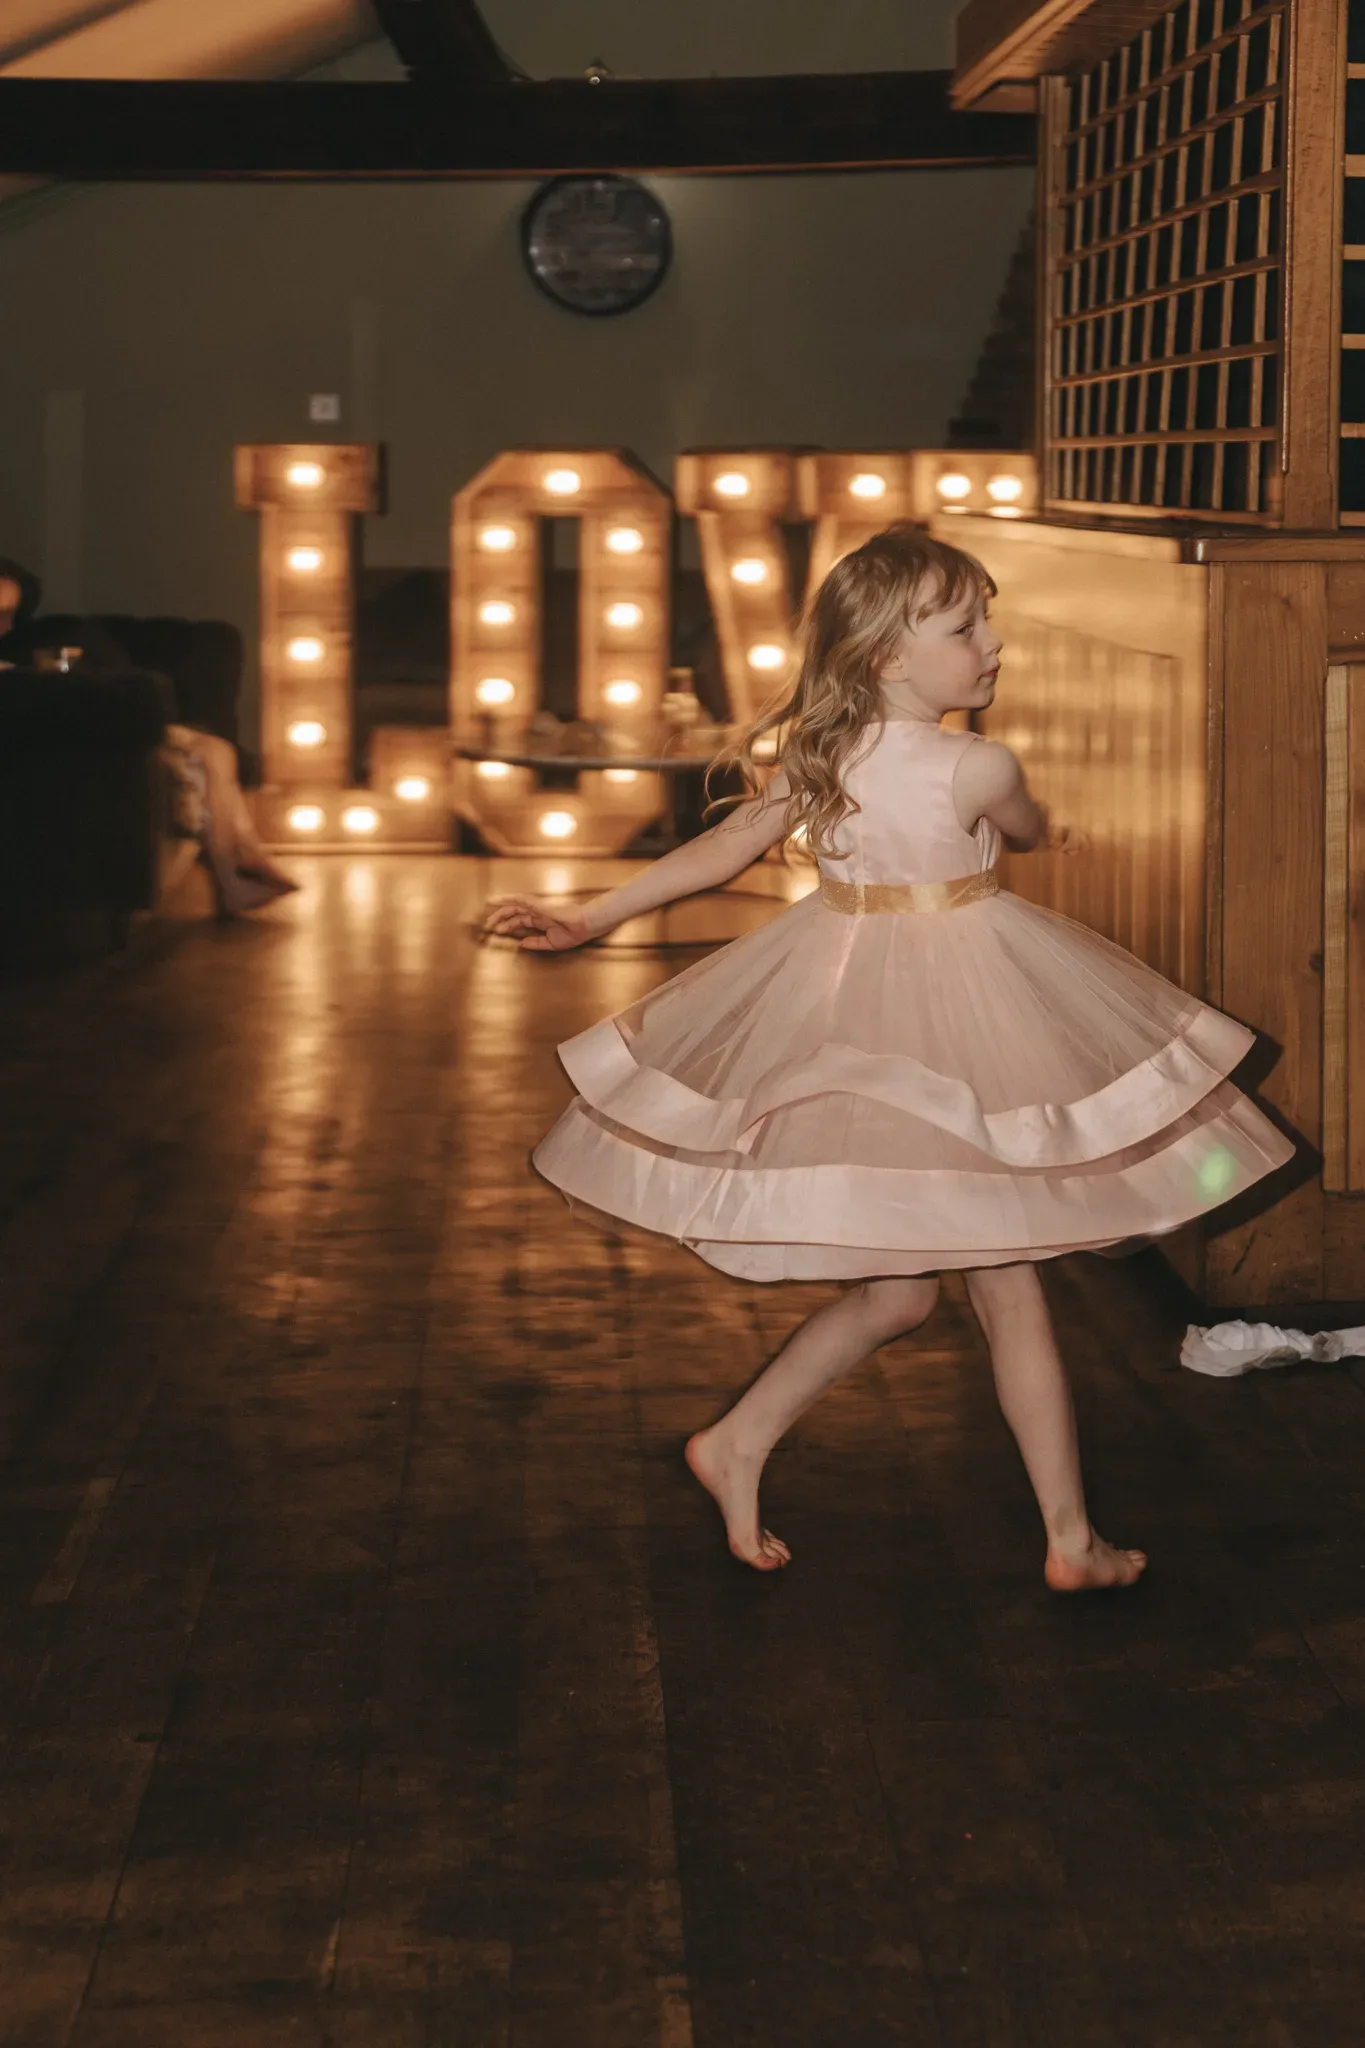 A young girl in a twirling pink dress dances barefoot on a wooden floor, illuminated by the warm glow of large marquee letters in the background.